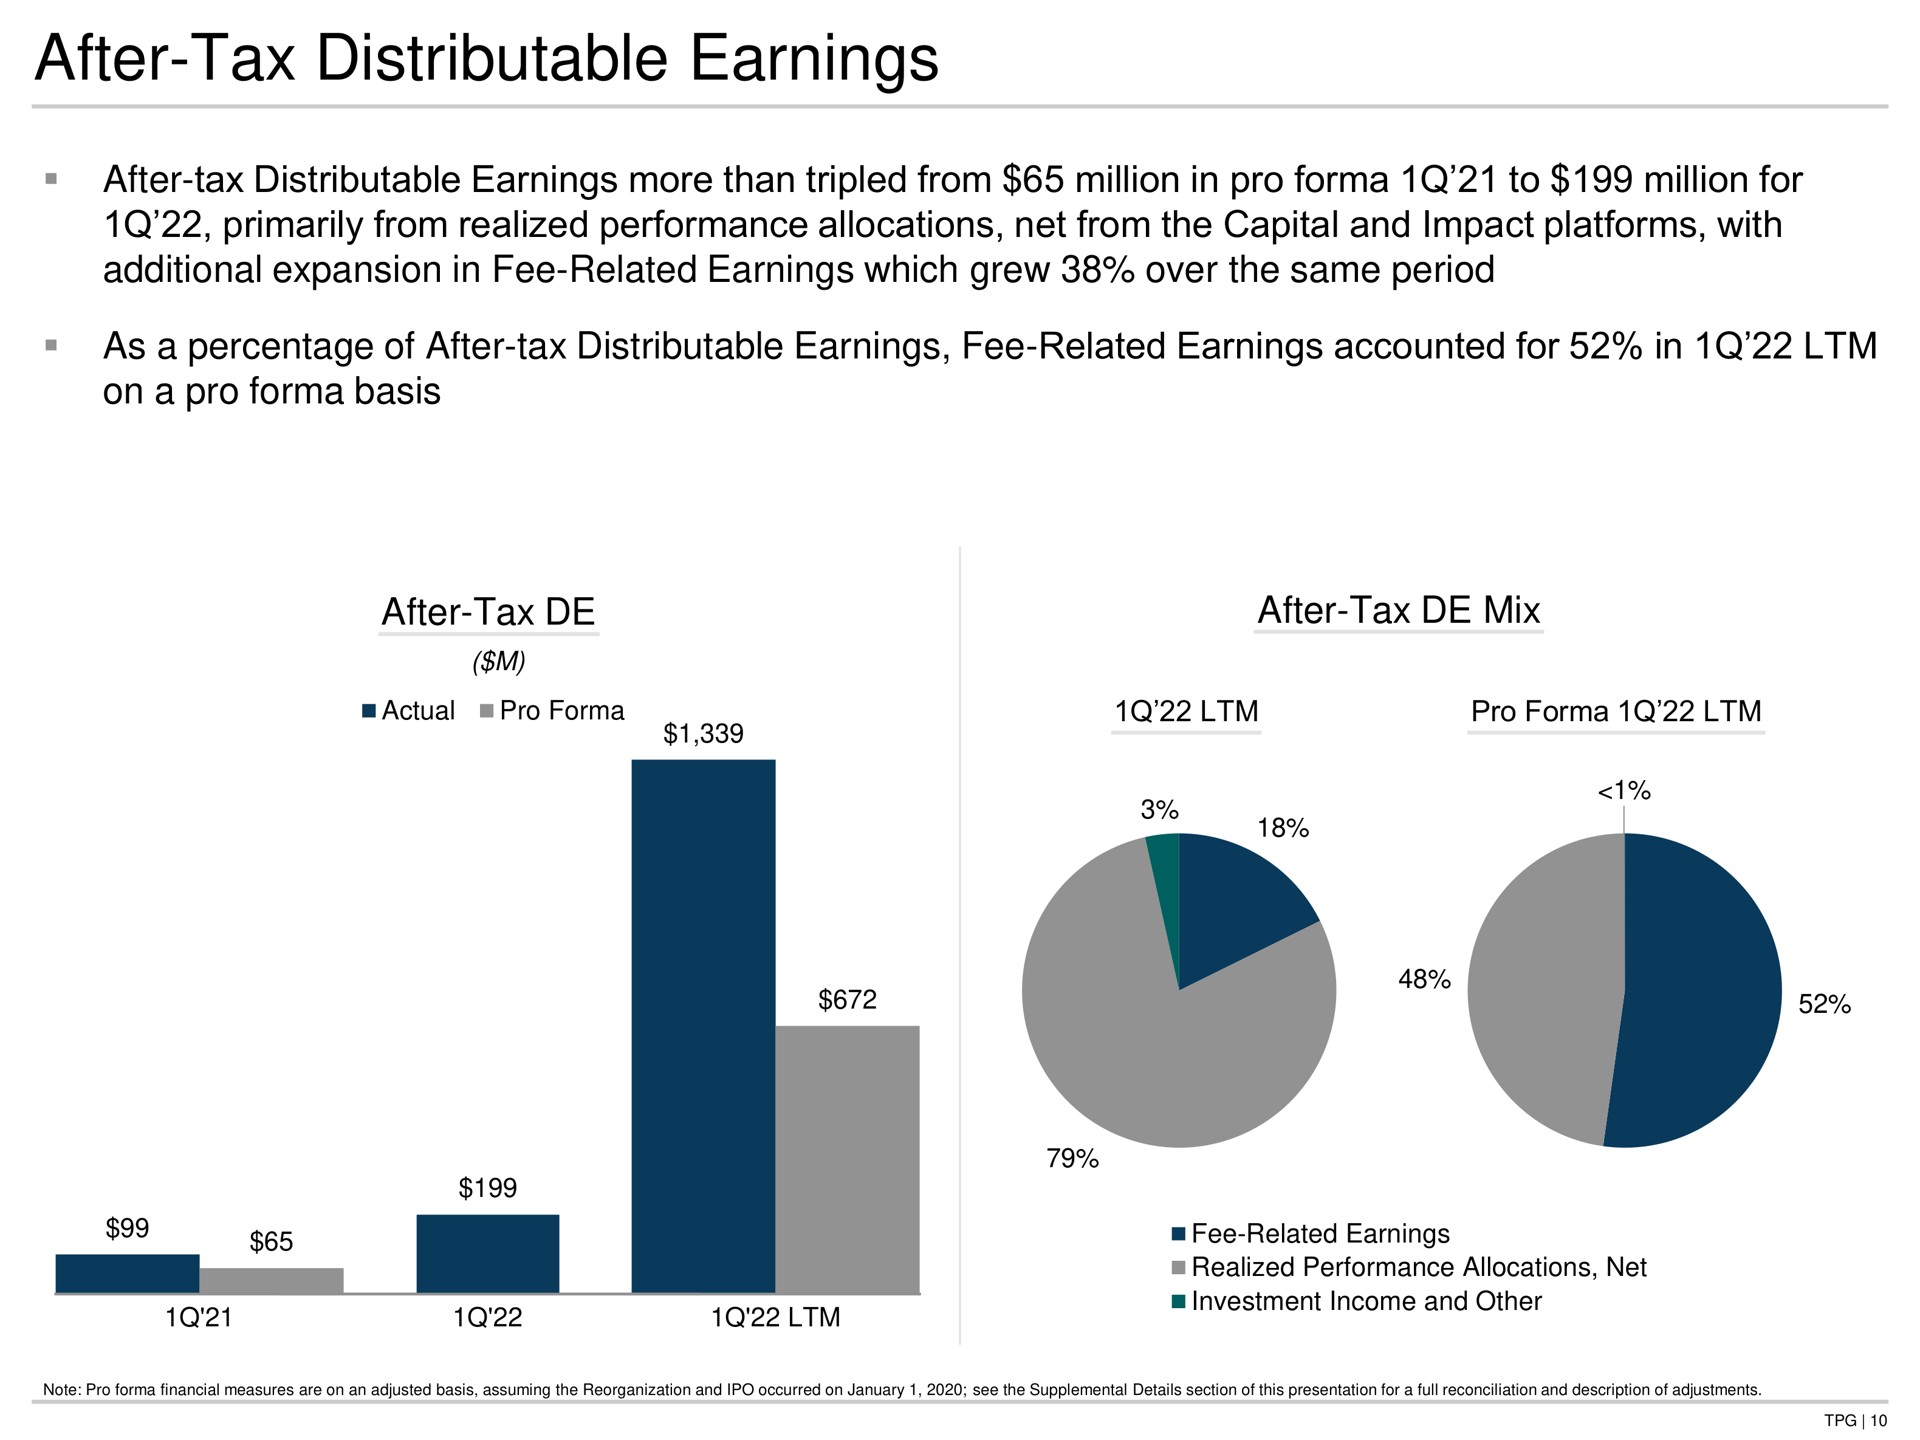 after tax distributable earnings after tax distributable earnings more than tripled from million in pro to million for primarily from realized performance allocations net from the capital and impact platforms with additional expansion in fee related earnings which grew over the same period as a percentage of after tax distributable earnings fee related earnings accounted for in on a pro basis after tax after tax mix | TPG